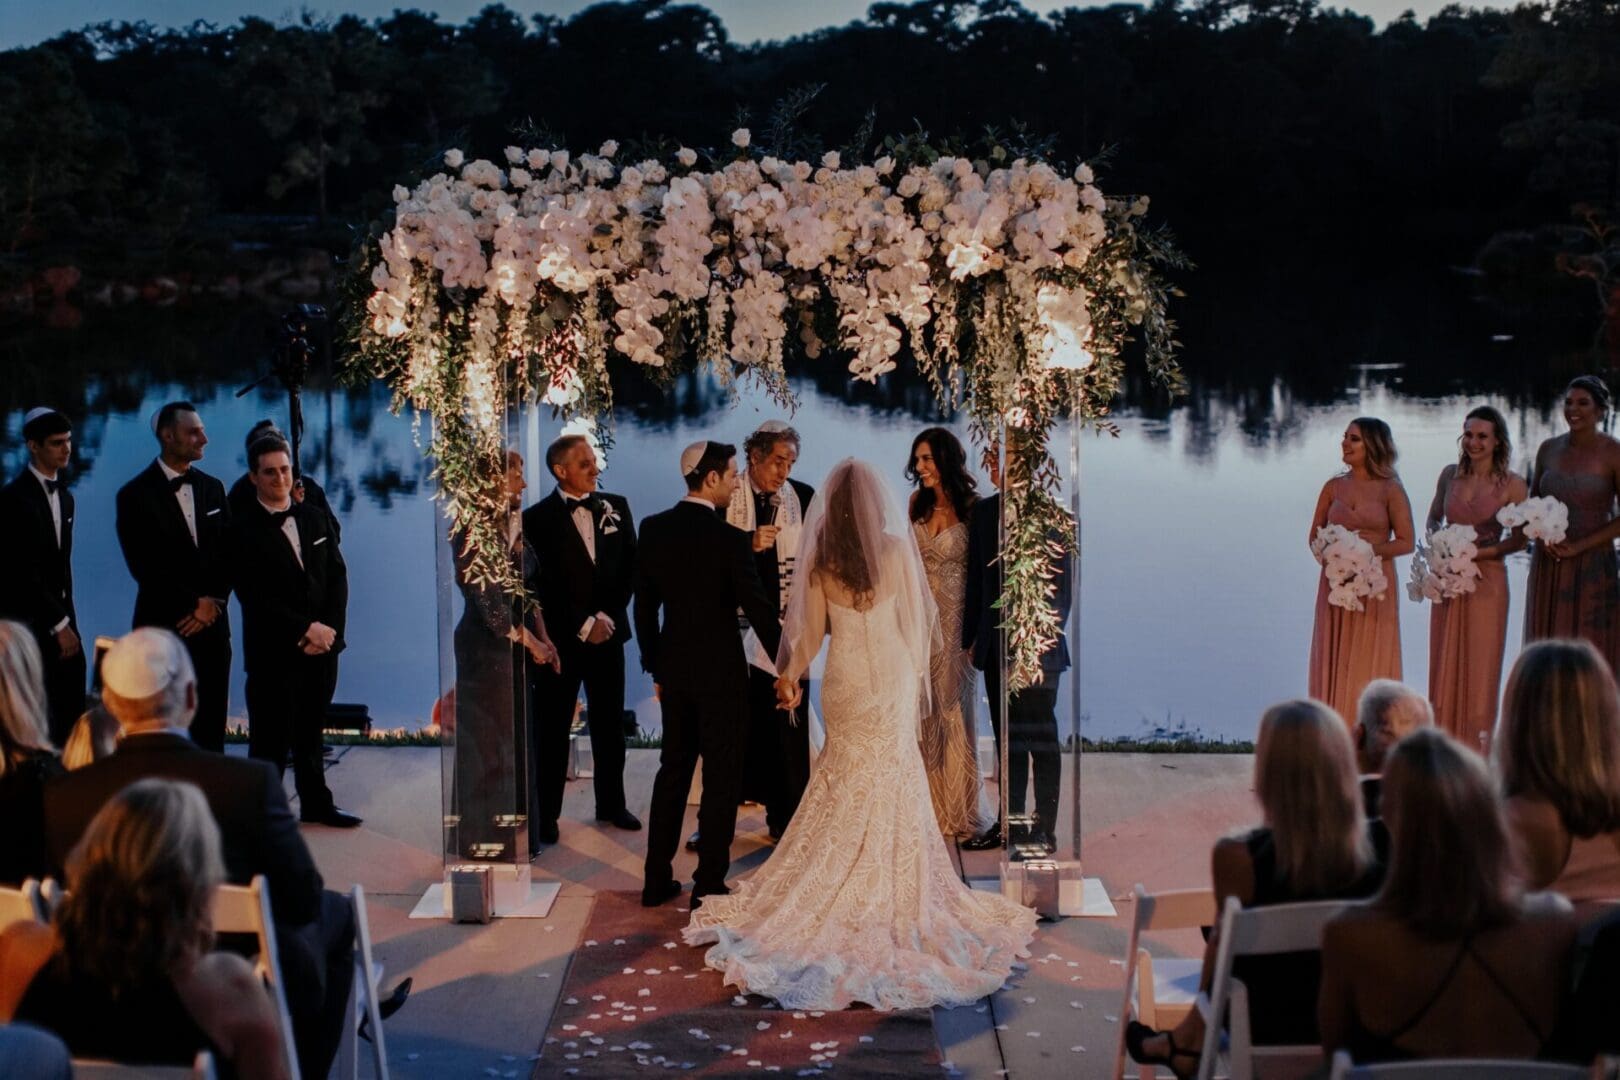 A wedding ceremony by a lake at sunset, featuring a couple at the altar, surrounded by attendants and guests, with floral decorations.